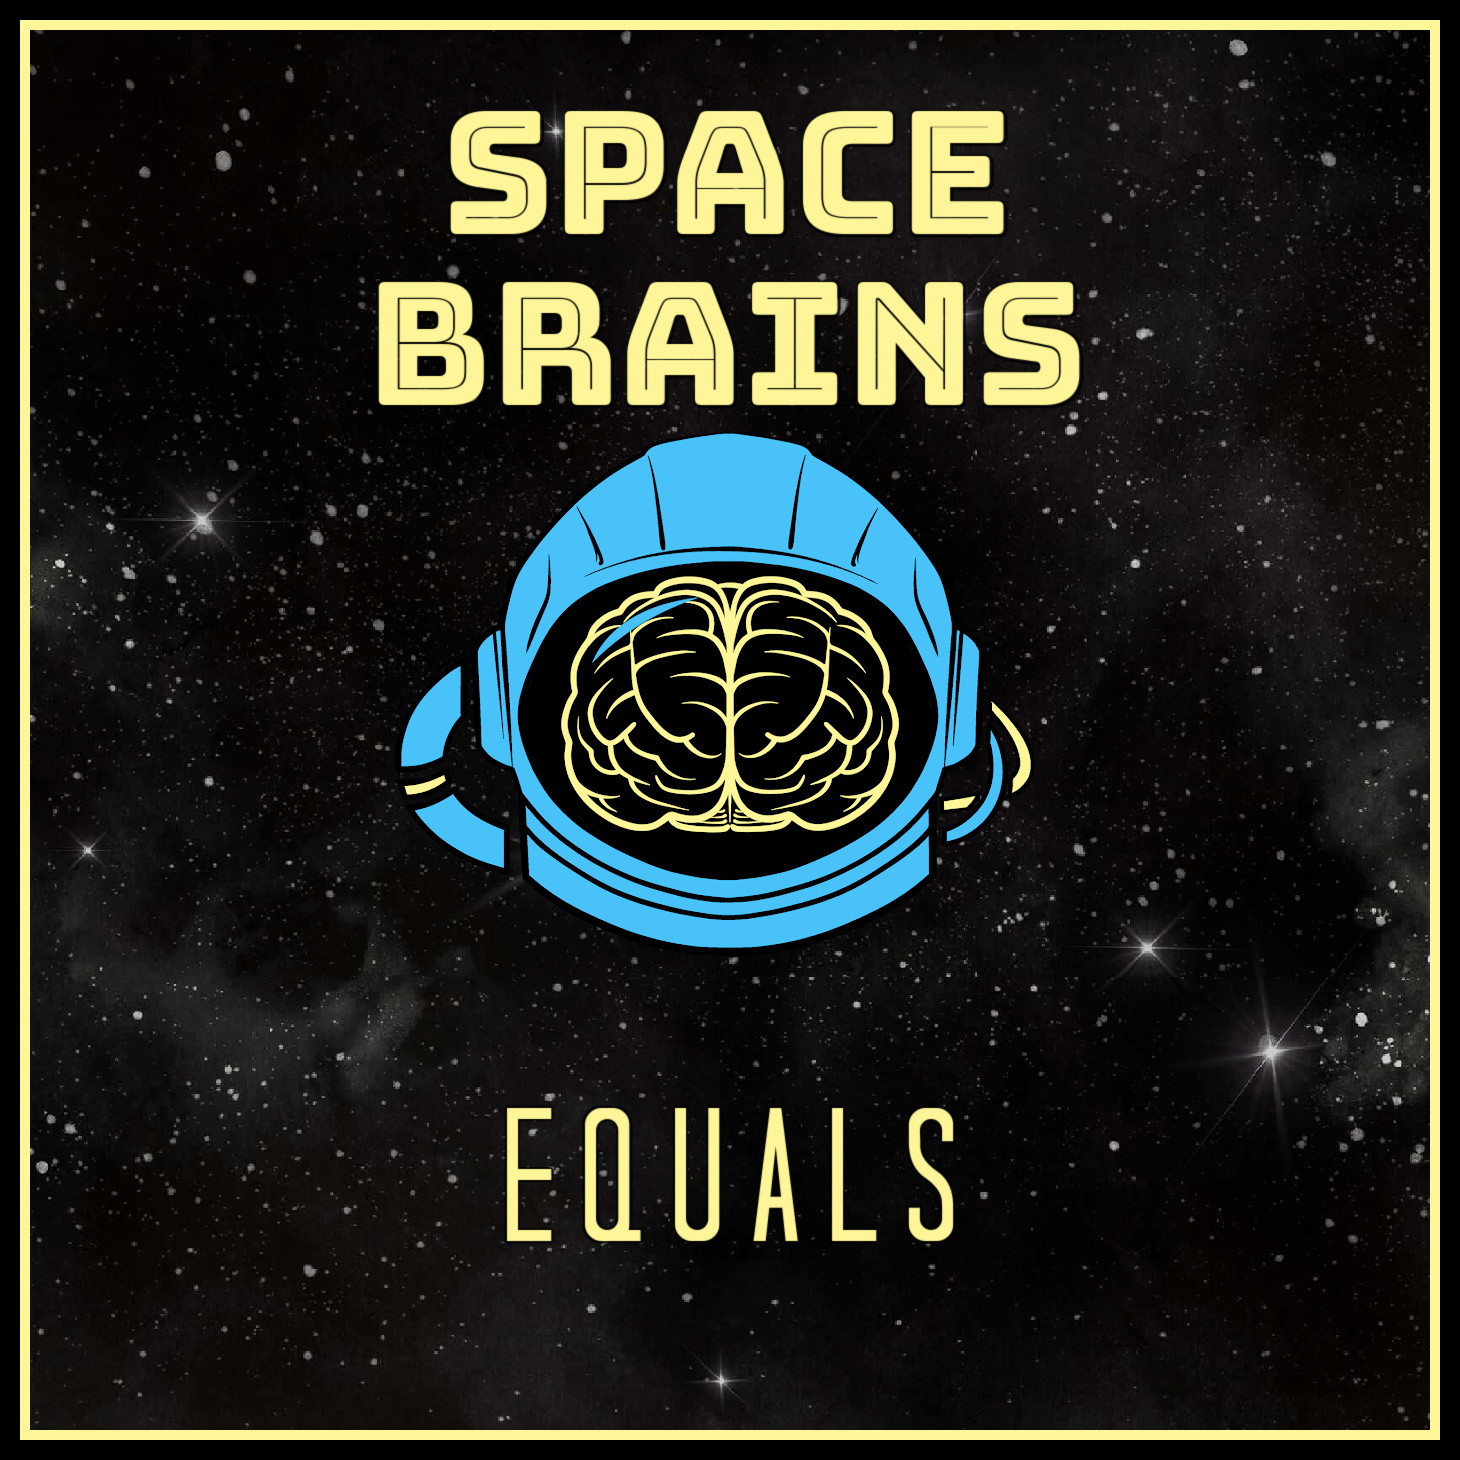 Space Brains - 4 - Equals